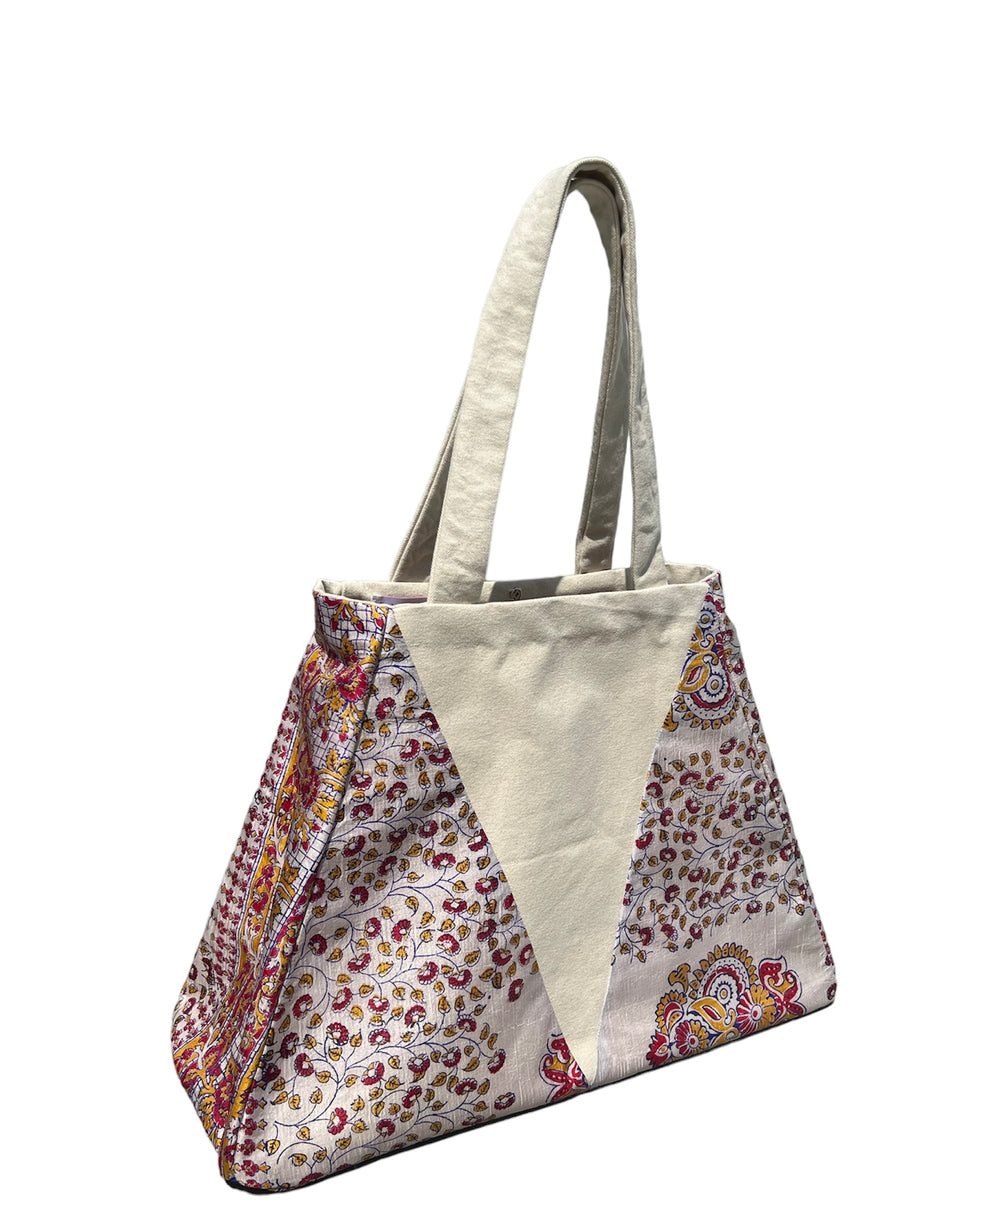 Tulsi Tote Bag - Red/Yellow Floral